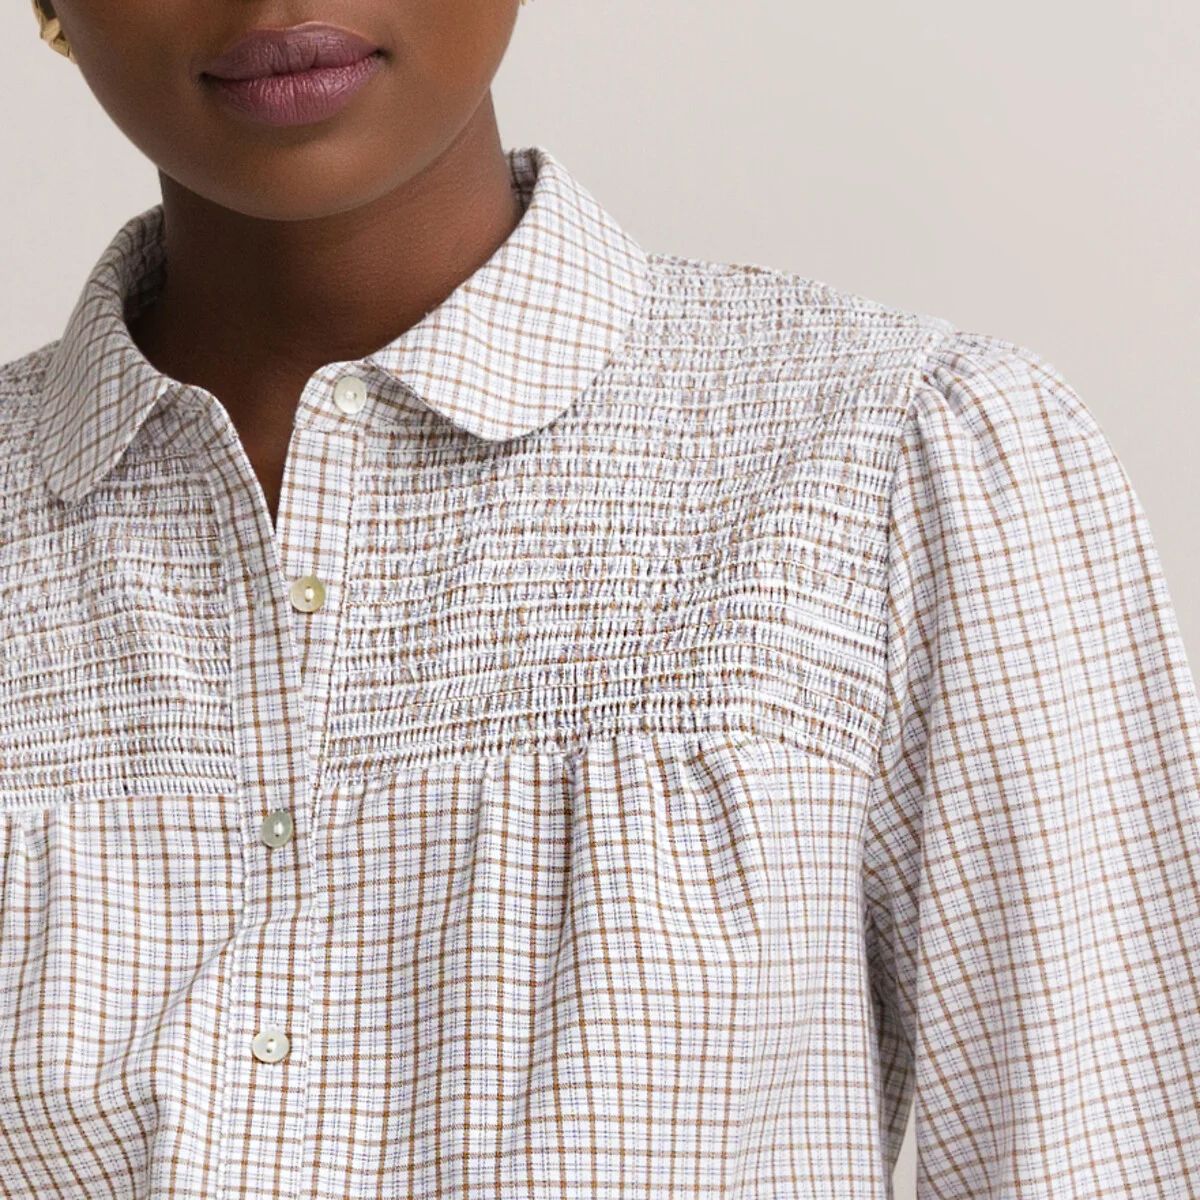 Checked Cotton Shirt with Long Sleeves | La Redoute (UK)